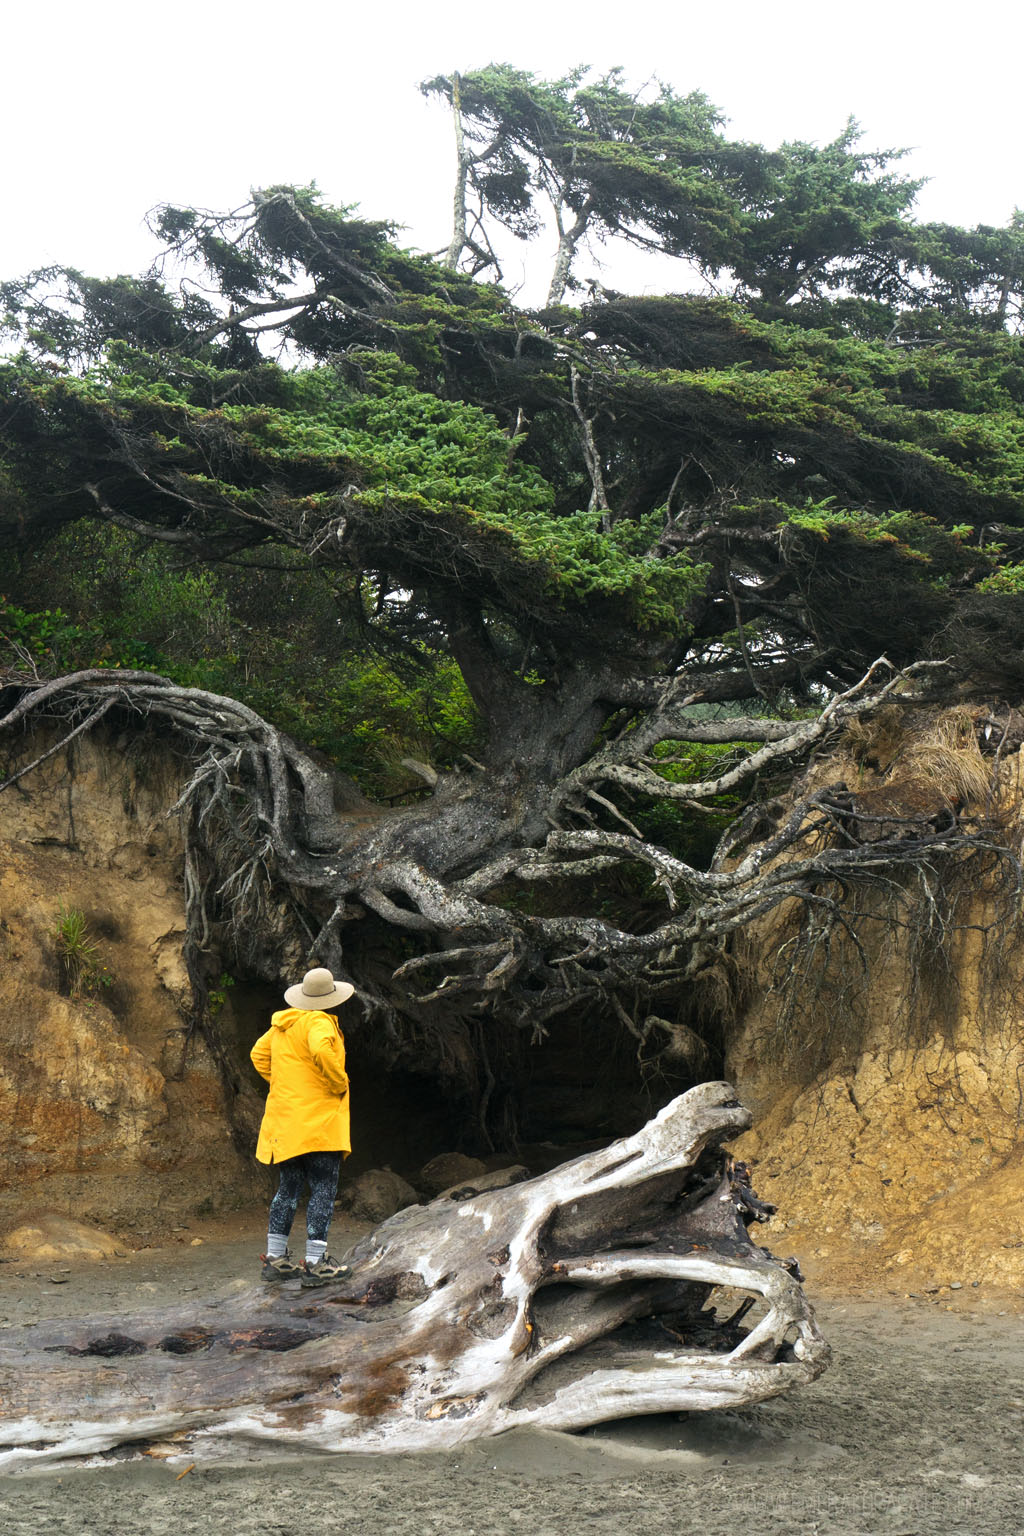 woman in raincoat standing on log looking up at huge tree growing over a crevasse so its roots are visible